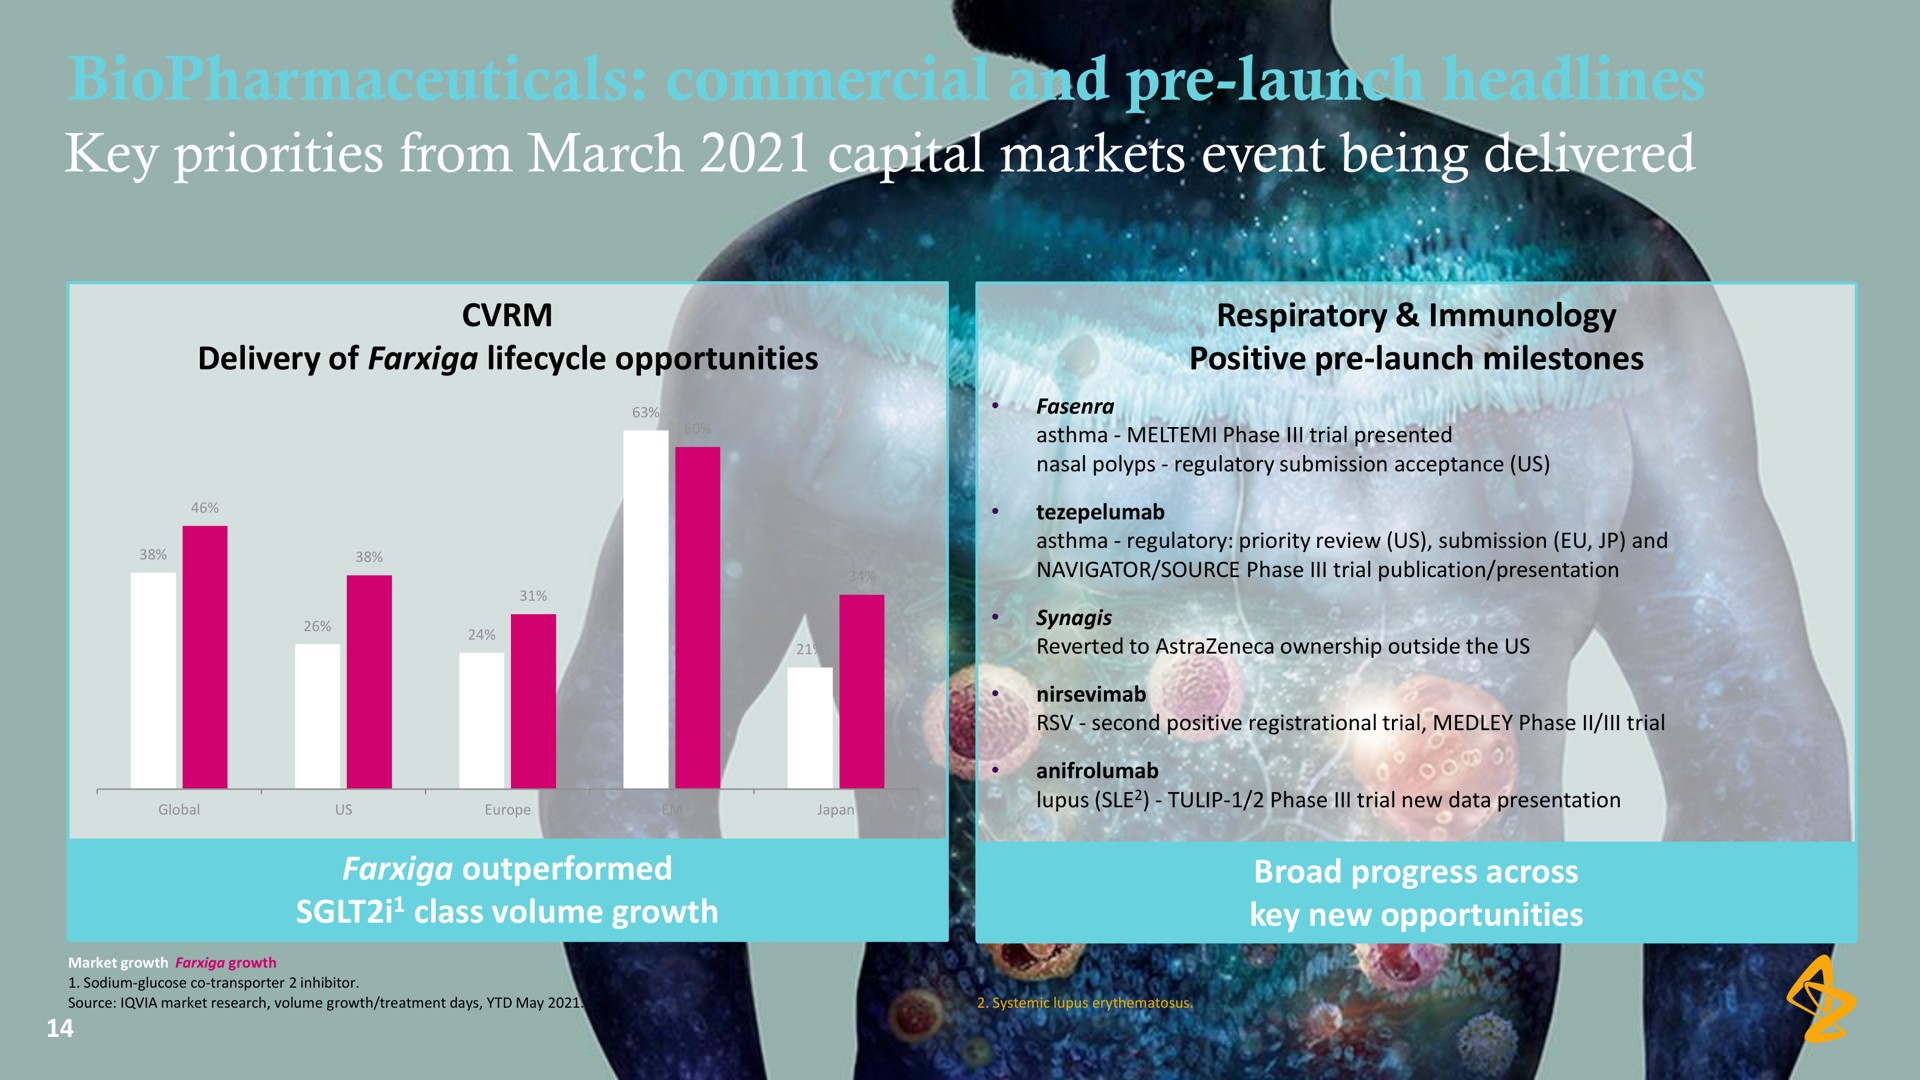 commercial and launch headlines markets event being | AstraZeneca